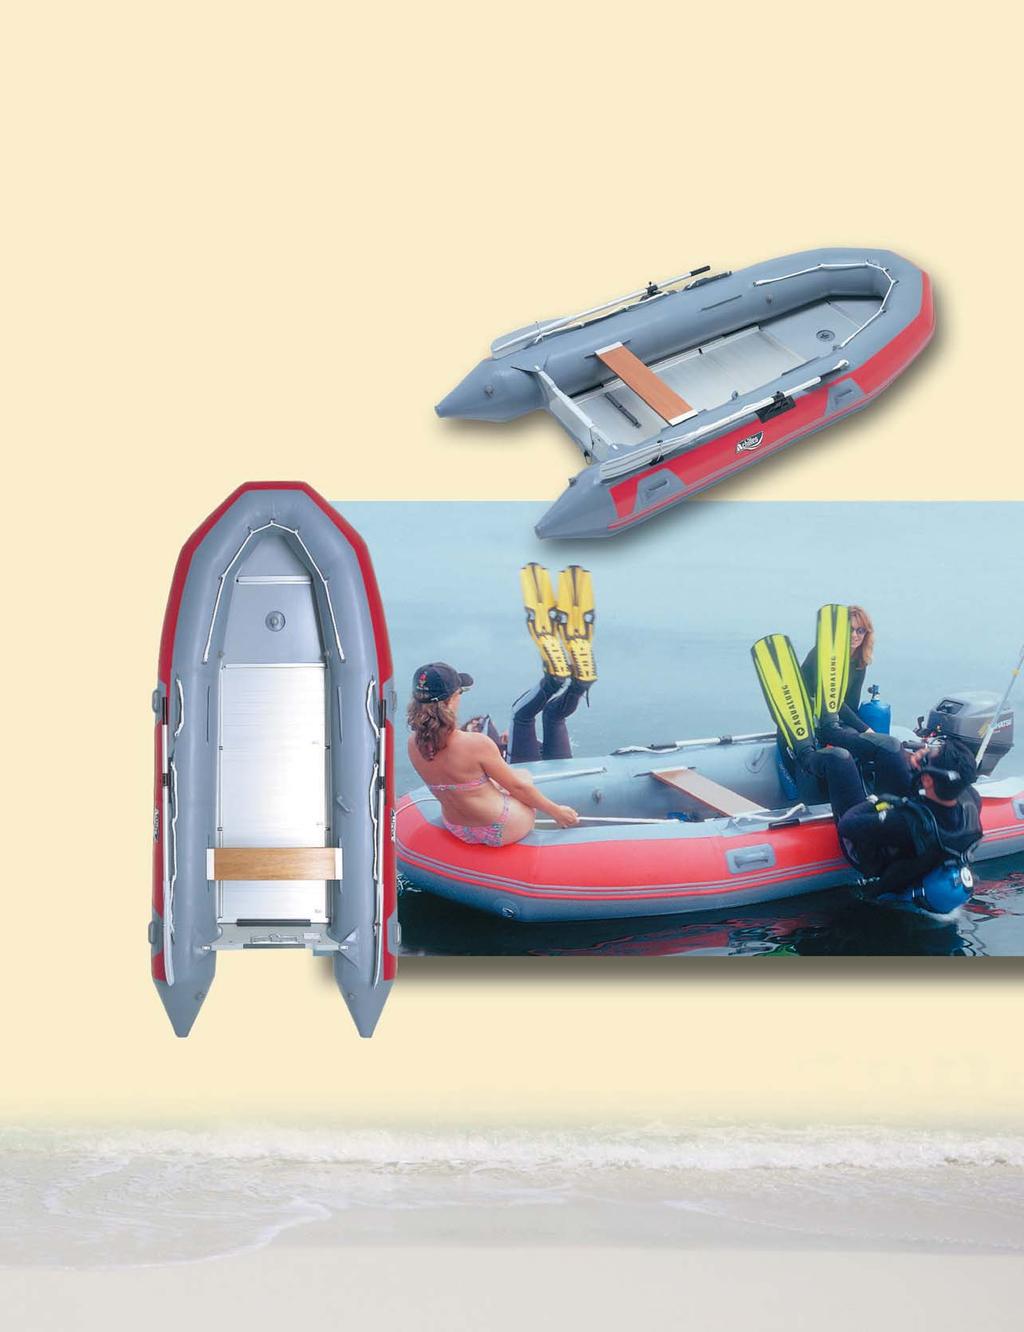 FRB P O R T & U T L T Y E R E GX P O R T & U T L T Y E R E P O RT & A versatile utility boat that s ready to go in minutes.